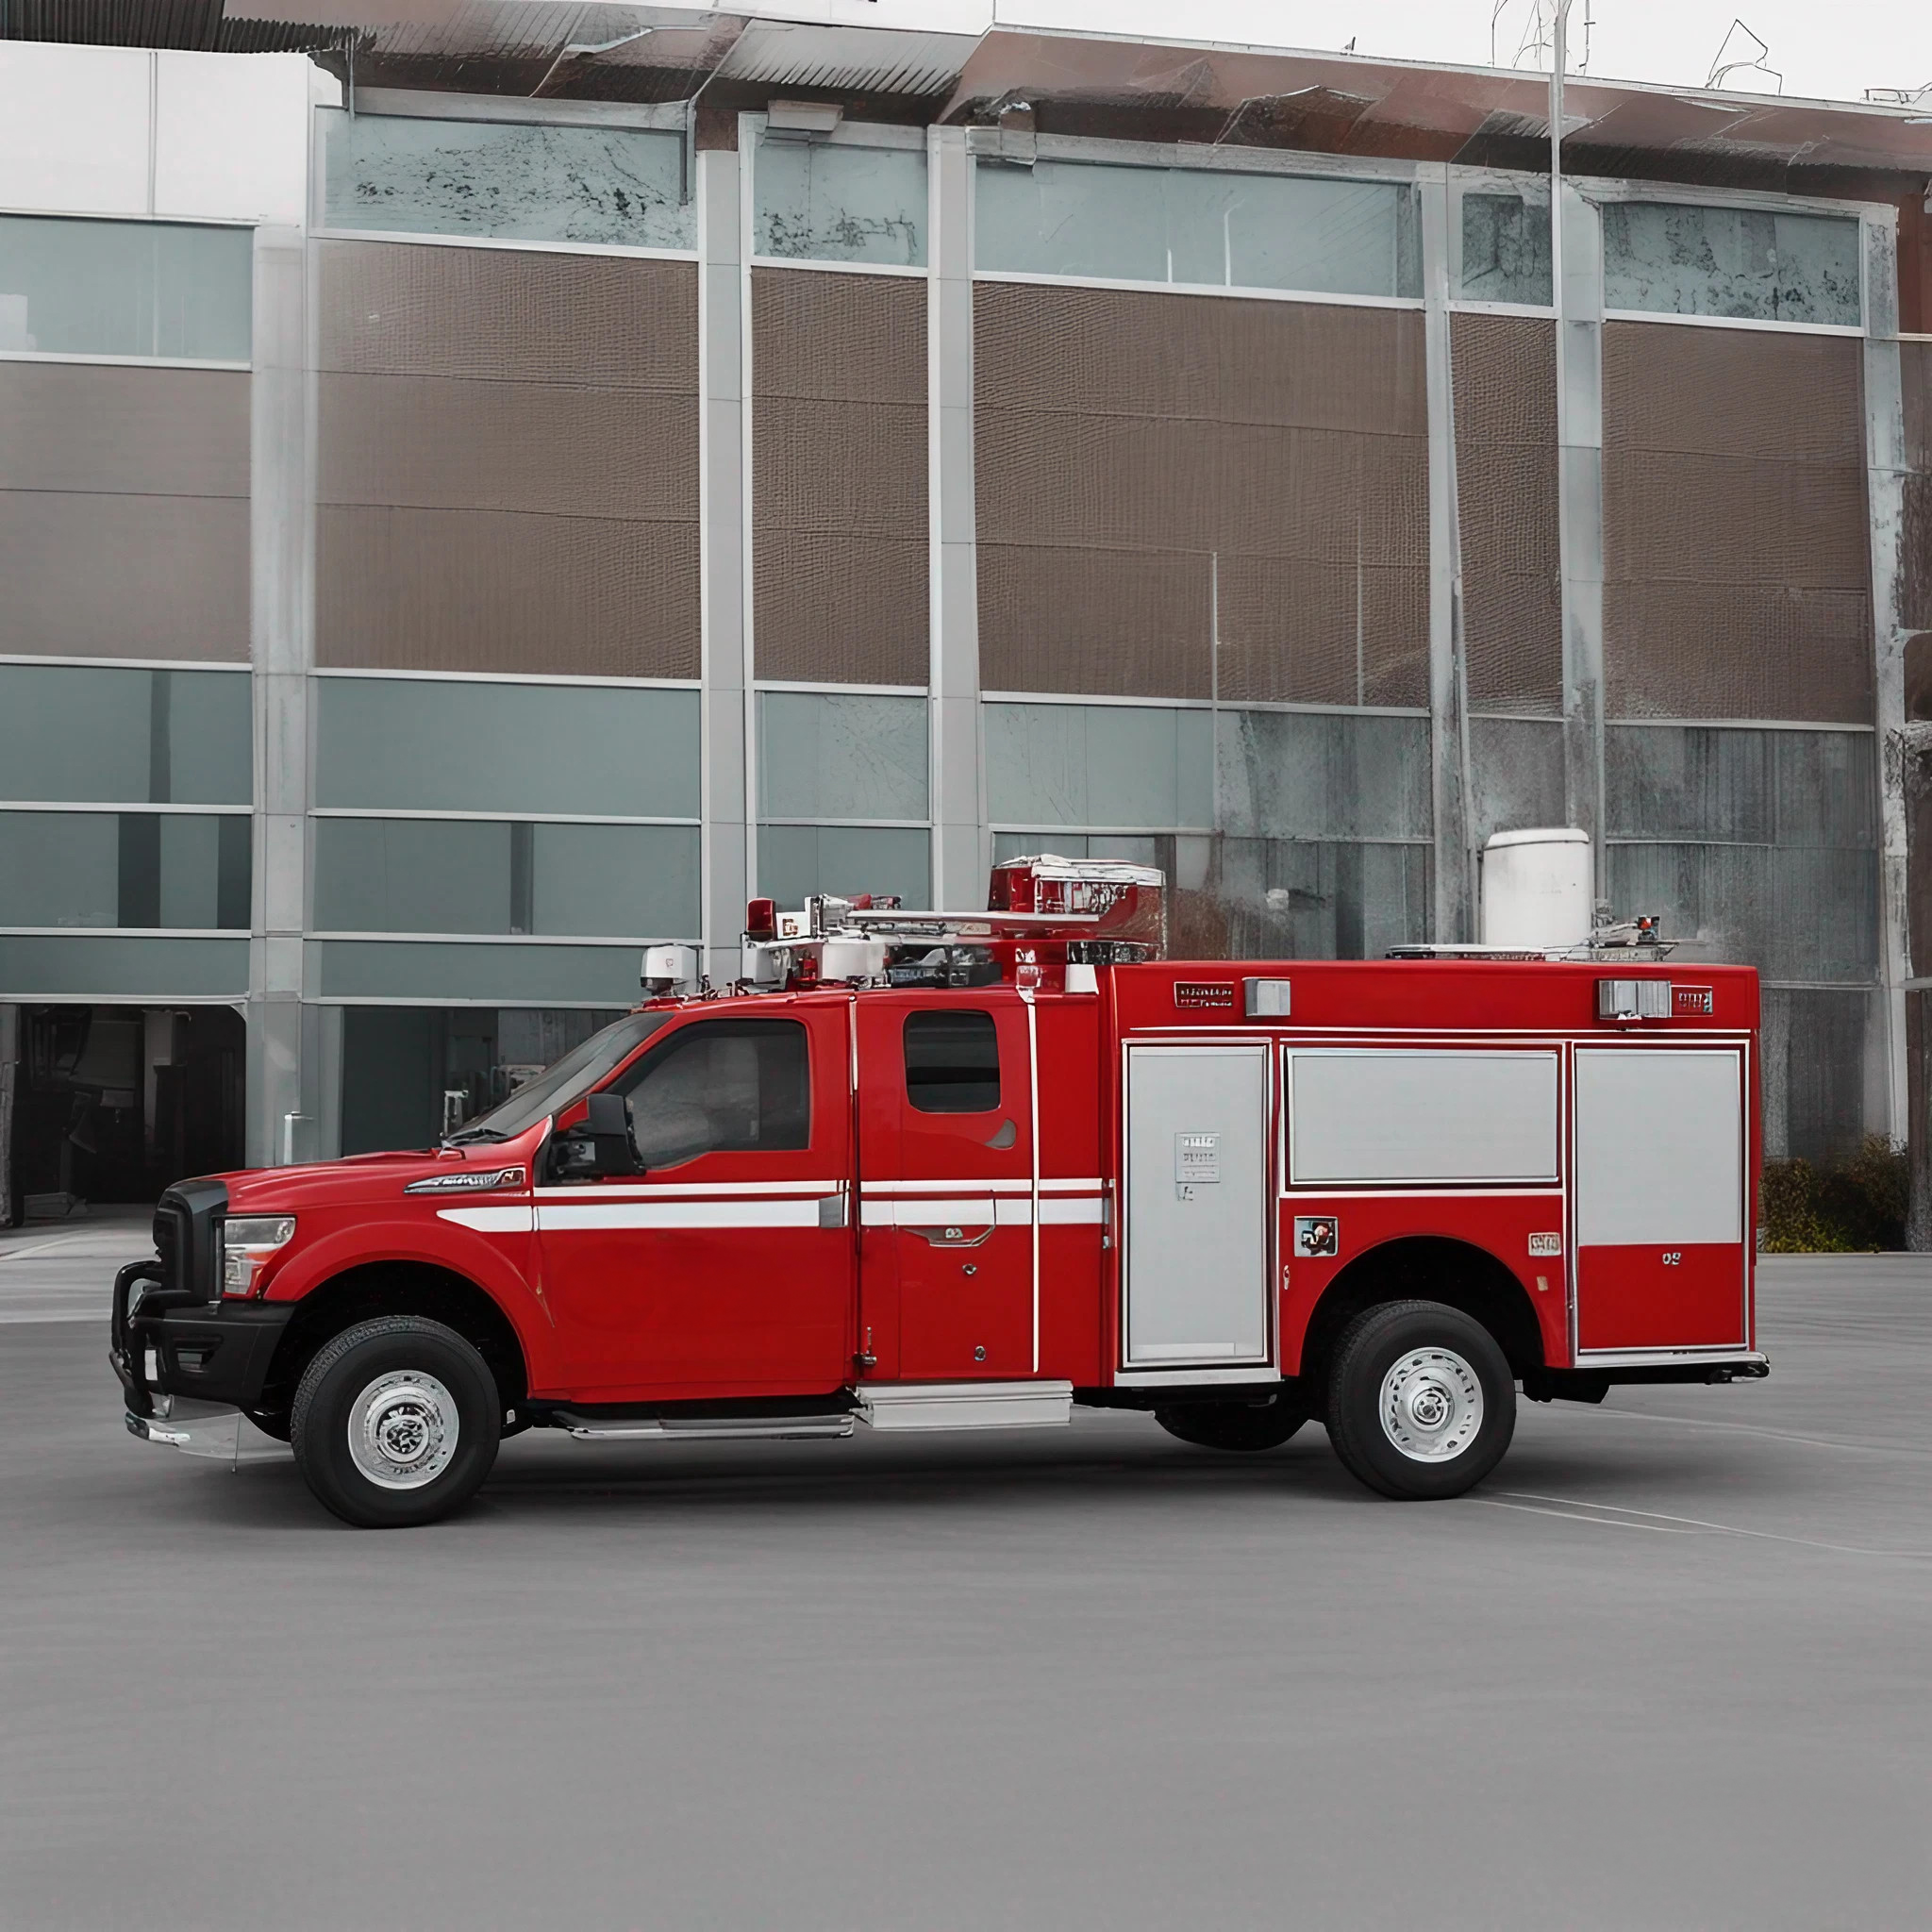 Fire Rescue Vehicle - Red - Urban